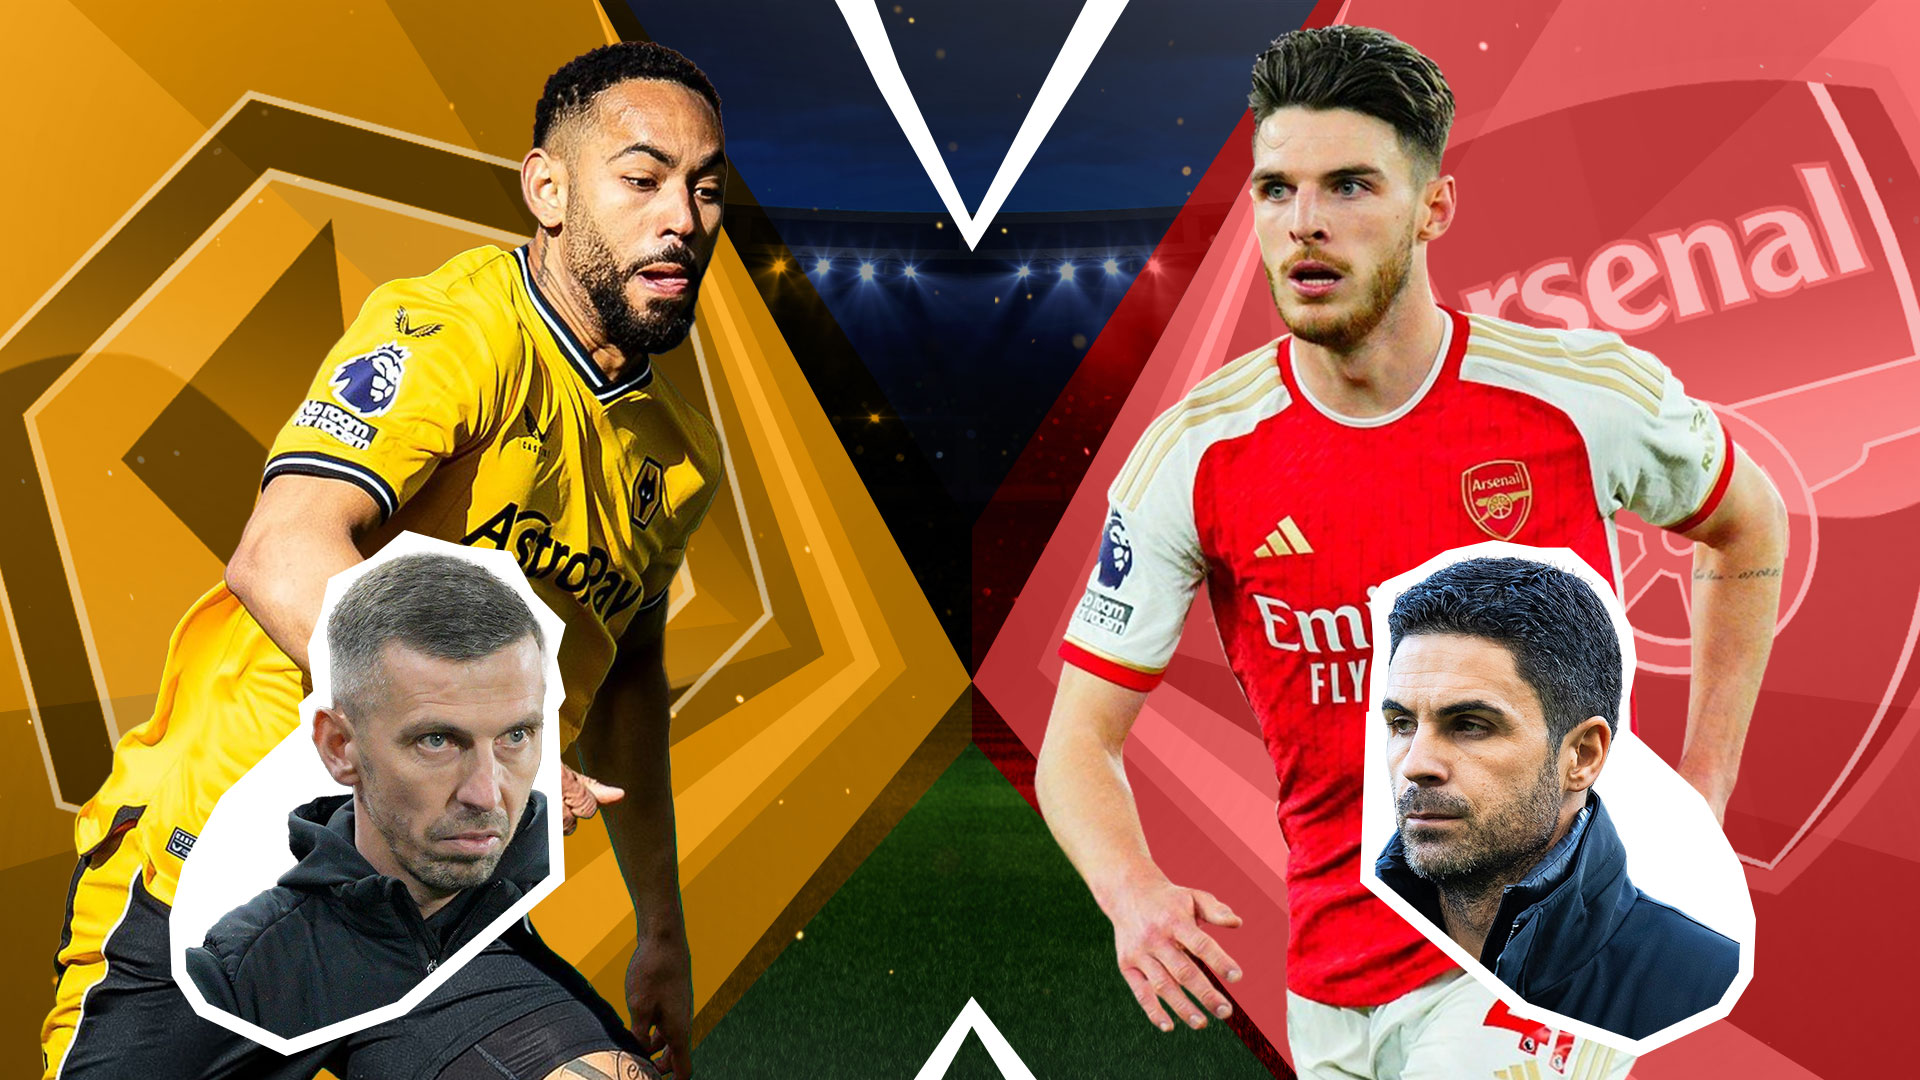 Wolves vs Arsenal LIVE commentary: Arteta desperate for win after nightmare week for the Gunners - kick-off time, team news and talkSPORT coverage